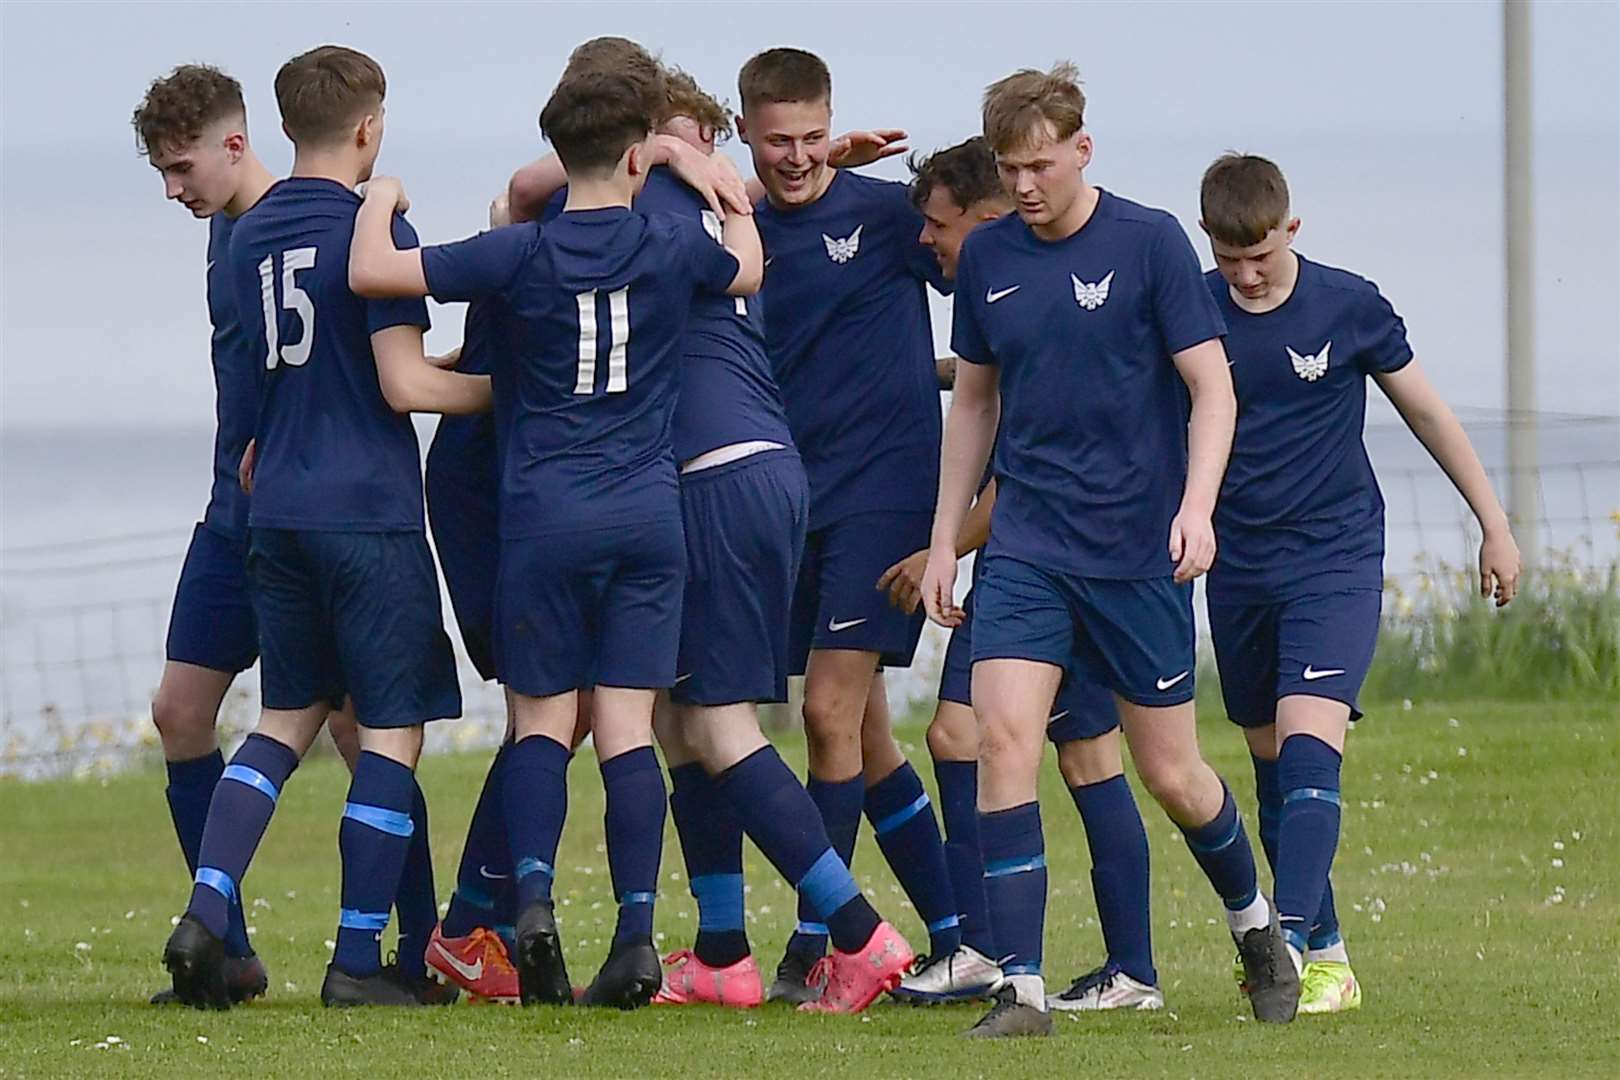 High Ormlie Hotspur players celebrate James Mackintosh's goal in their 1-0 victory over Helmsdale United in the first round of the Highland Amateur Cup on Saturday. Picture: Mel Roger